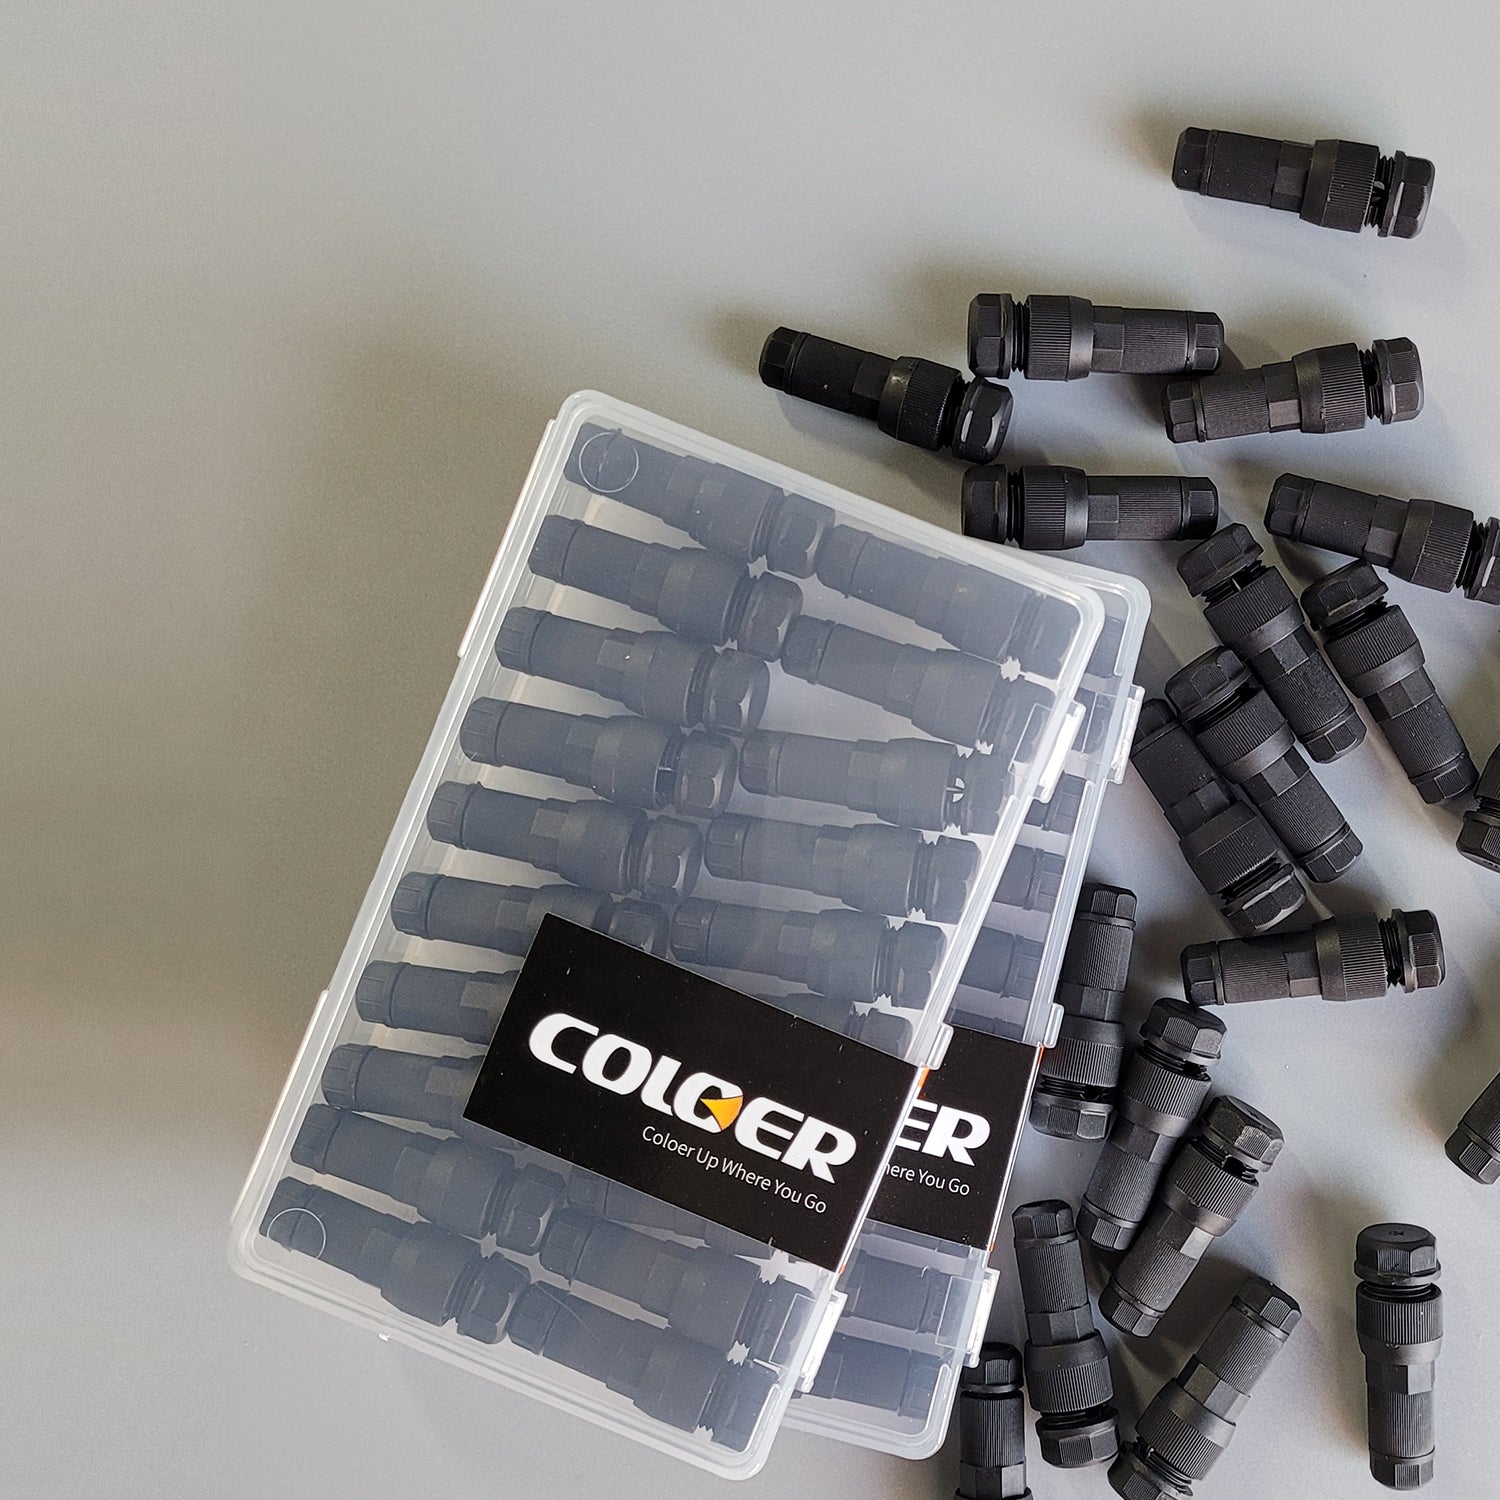 Package of 20 low voltage wire tap connectors for 12-20 gauge landscape lighting cable, with screw tight design and waterproof, for use in various outdoor locations and applications.